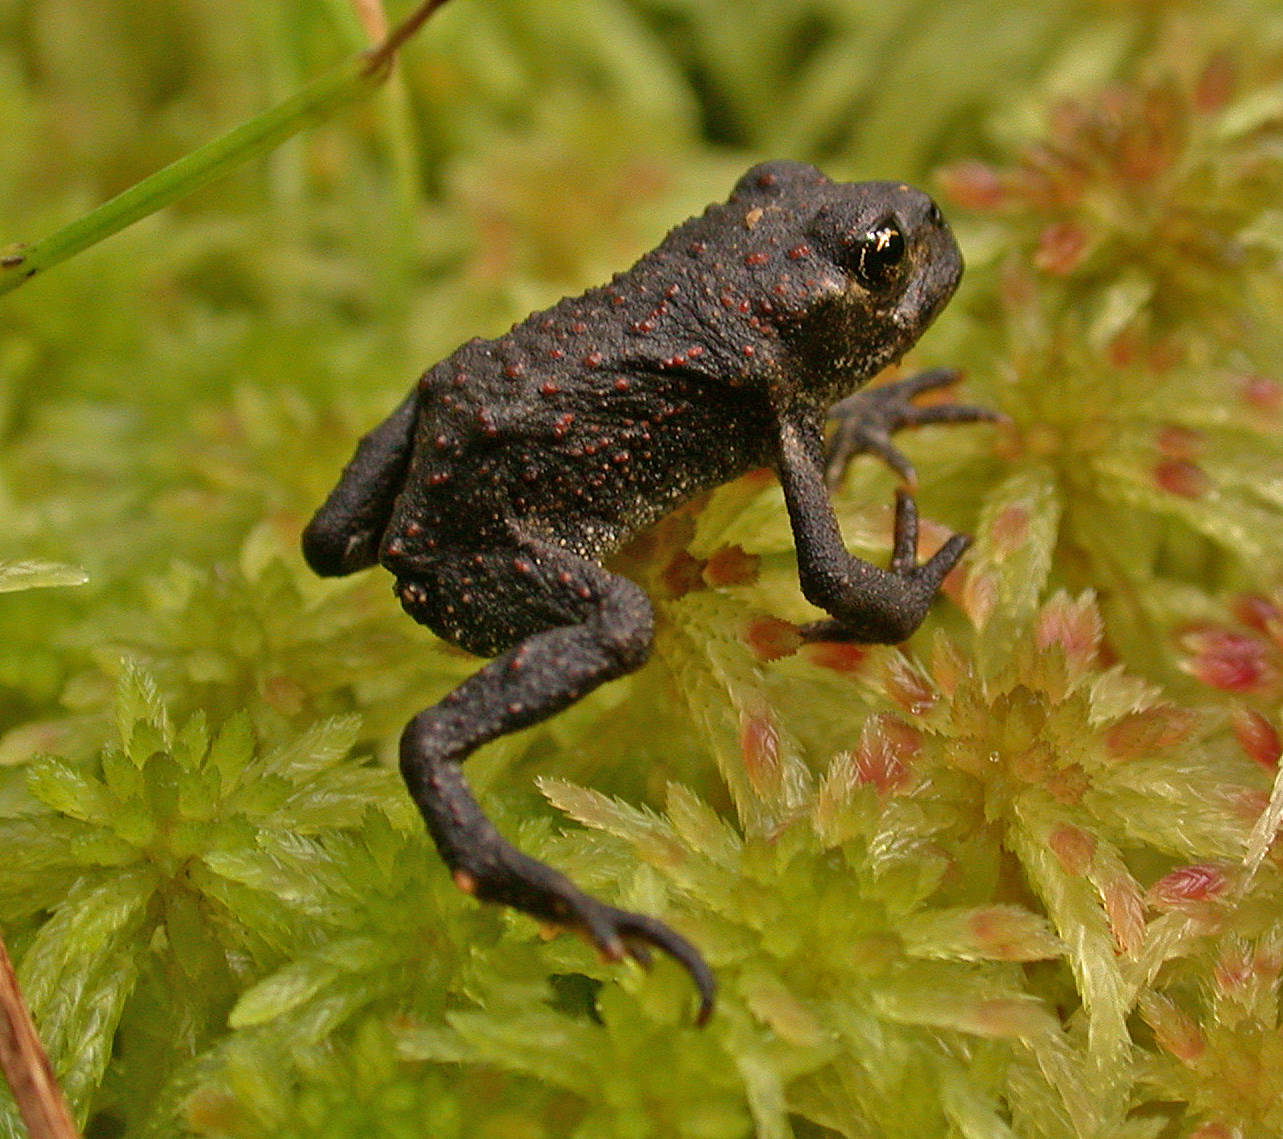 A very young western toad, showing the characteristic many bumps on its back. (Photo by Bob Armstrong)